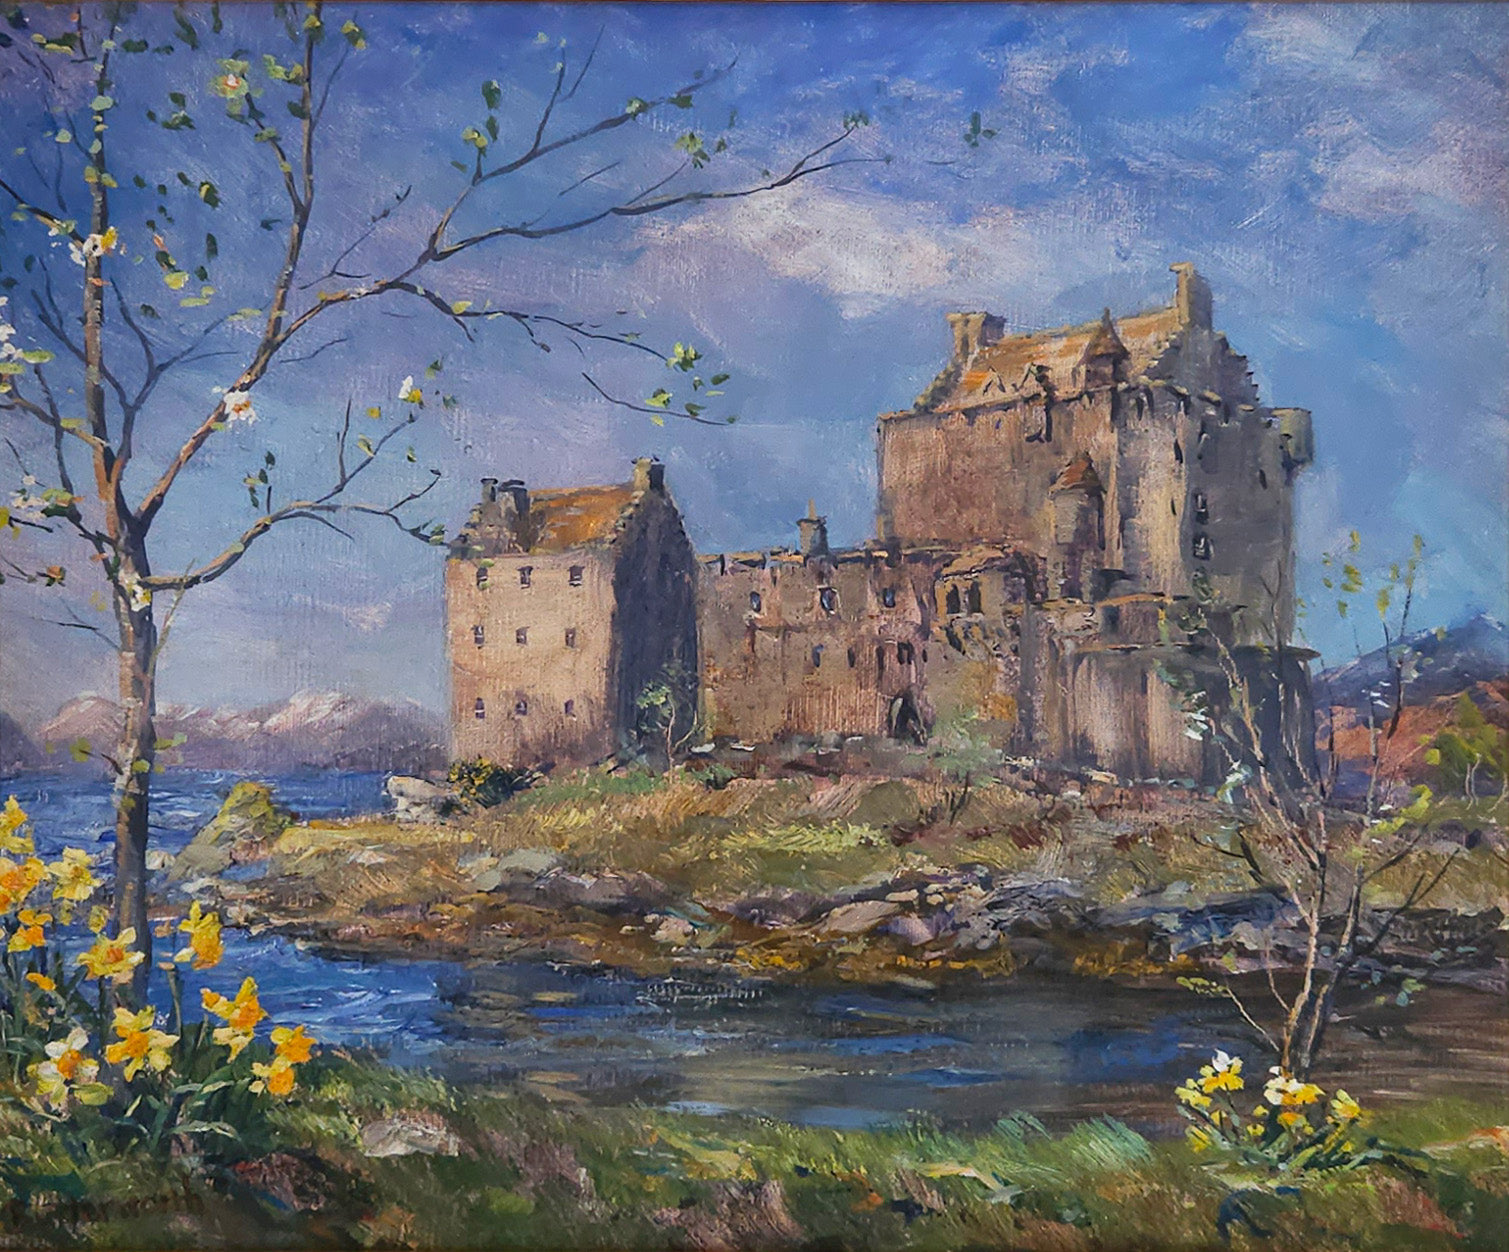 Spring sunshine on Eilean Donan Castle, with daffodils on the banks of Loch Duich in the Scottish Highlands.Oil painting by artist Howard Butterworth